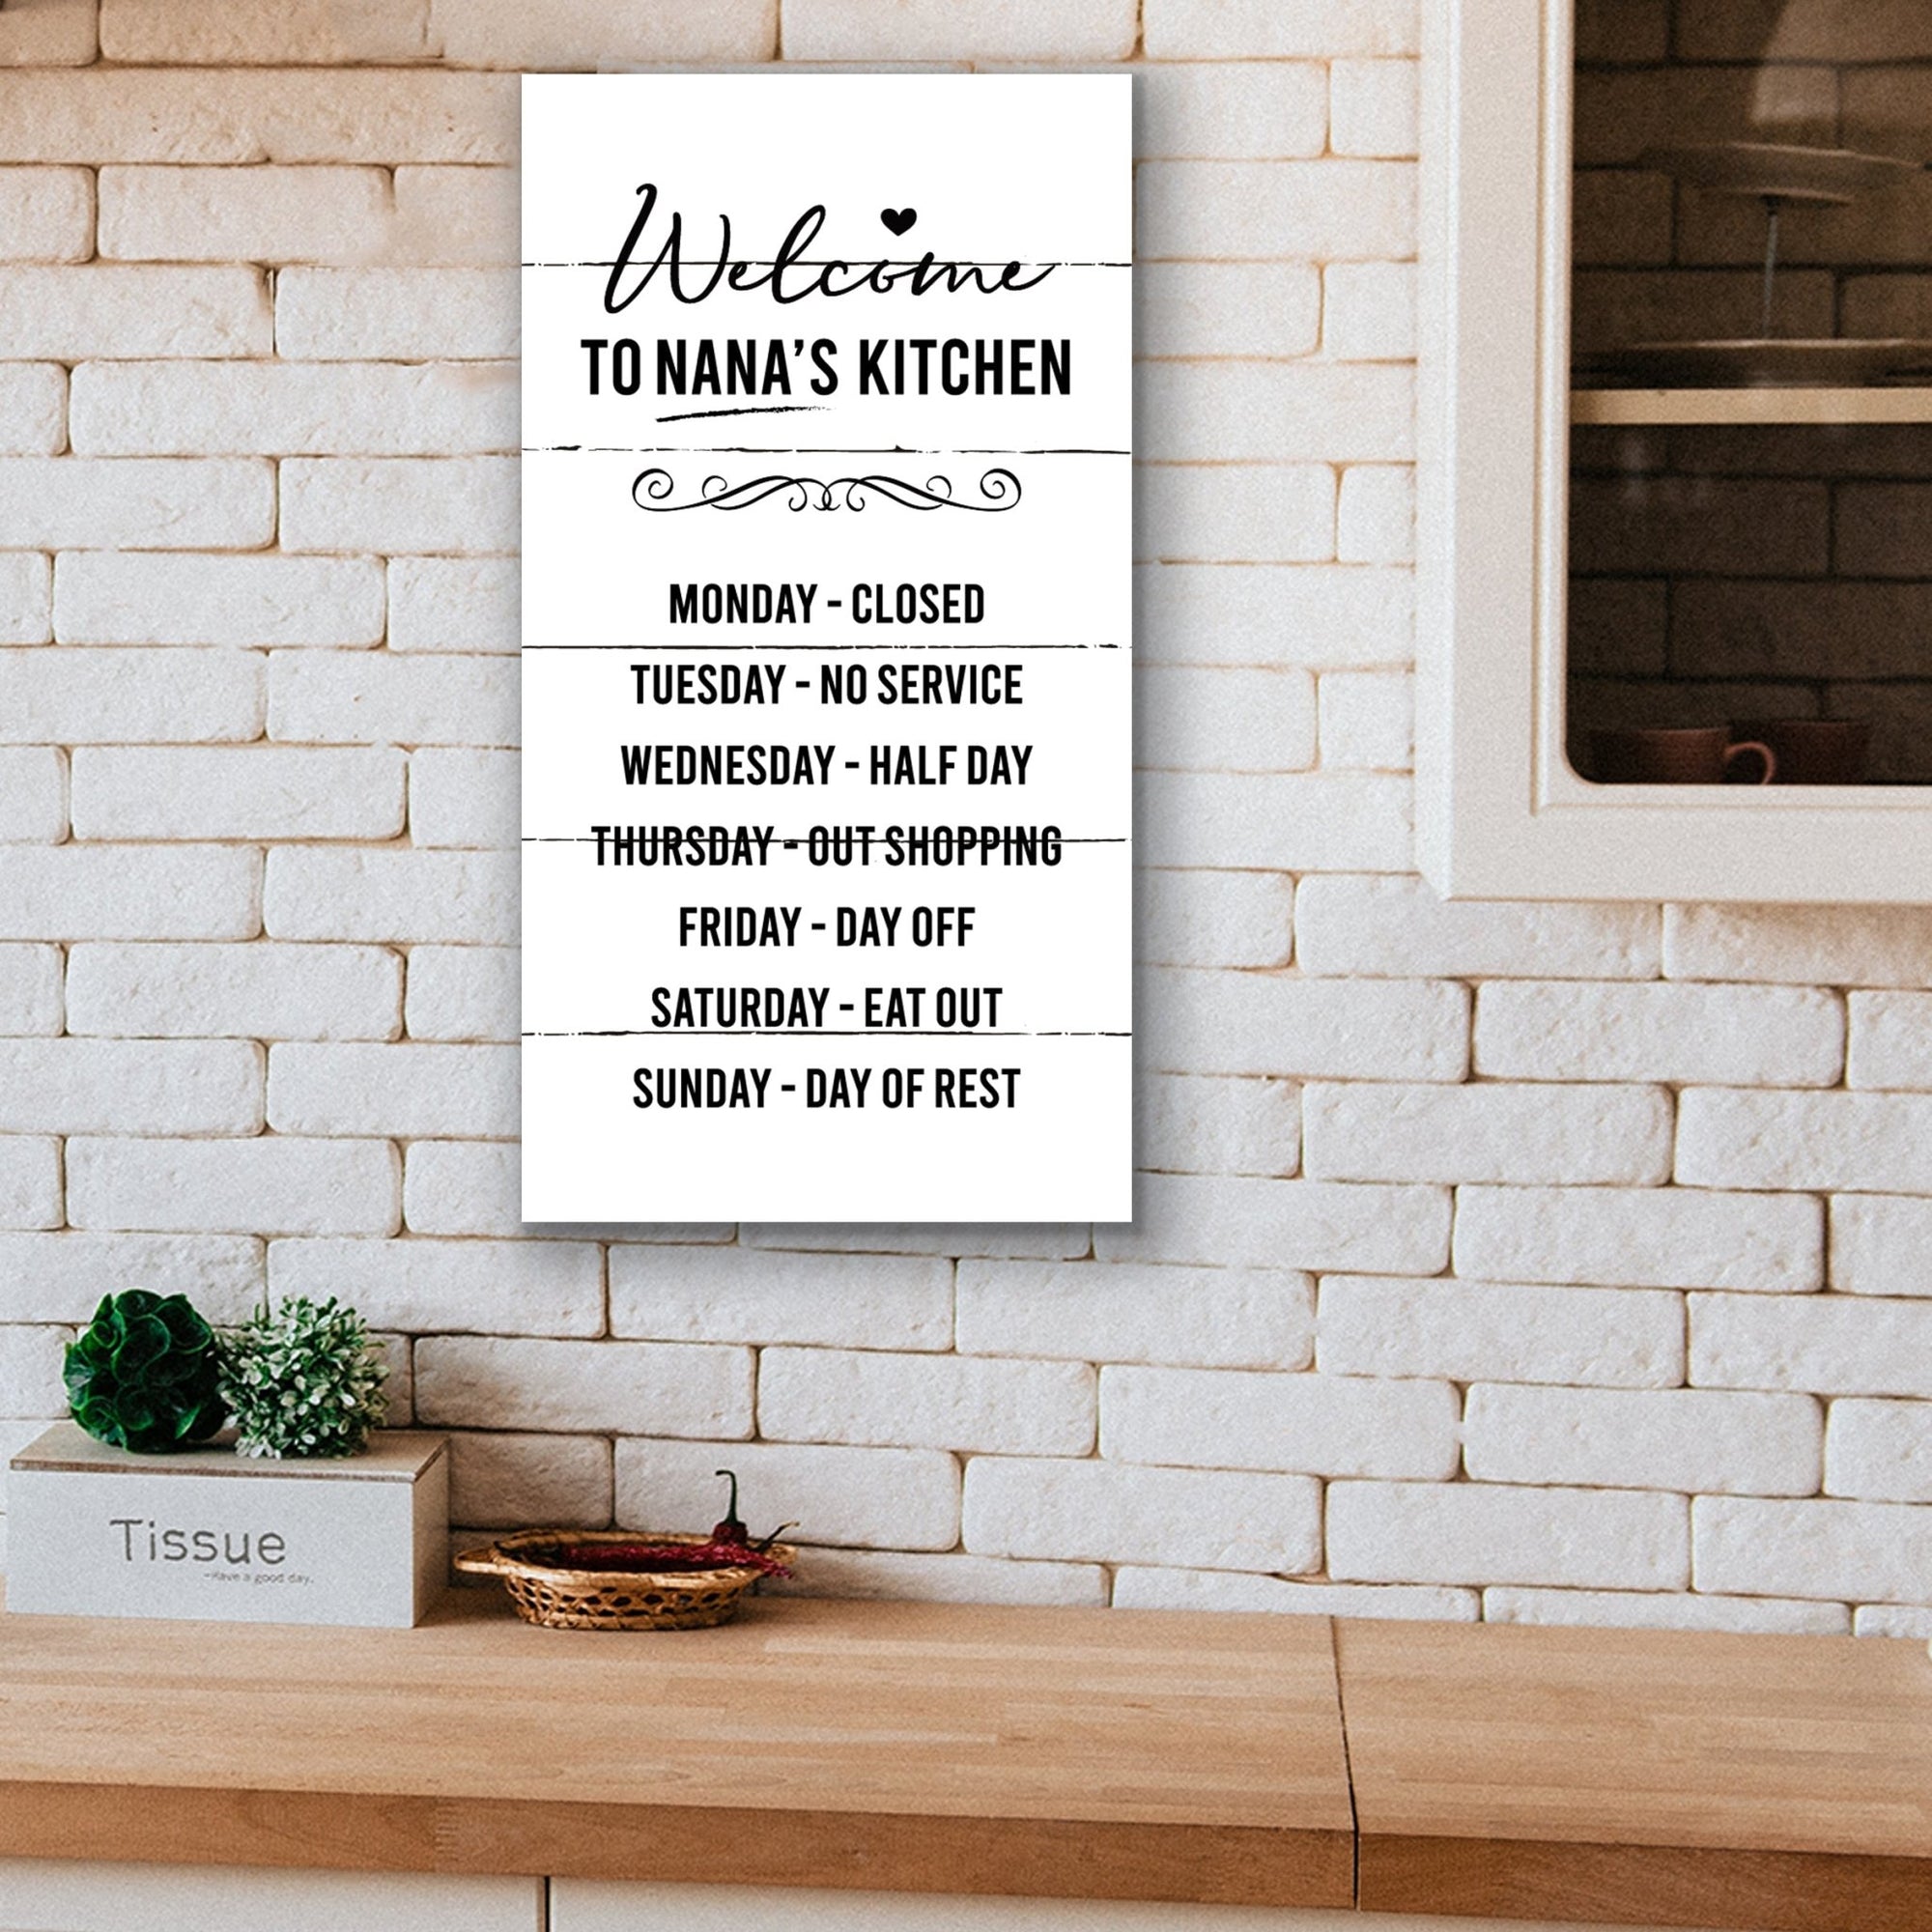 Rustic Kitchen Wooden Wall Plaque Home Décor or Gift Ideas - Welcome To Nana's Kitchen - LifeSong Milestones